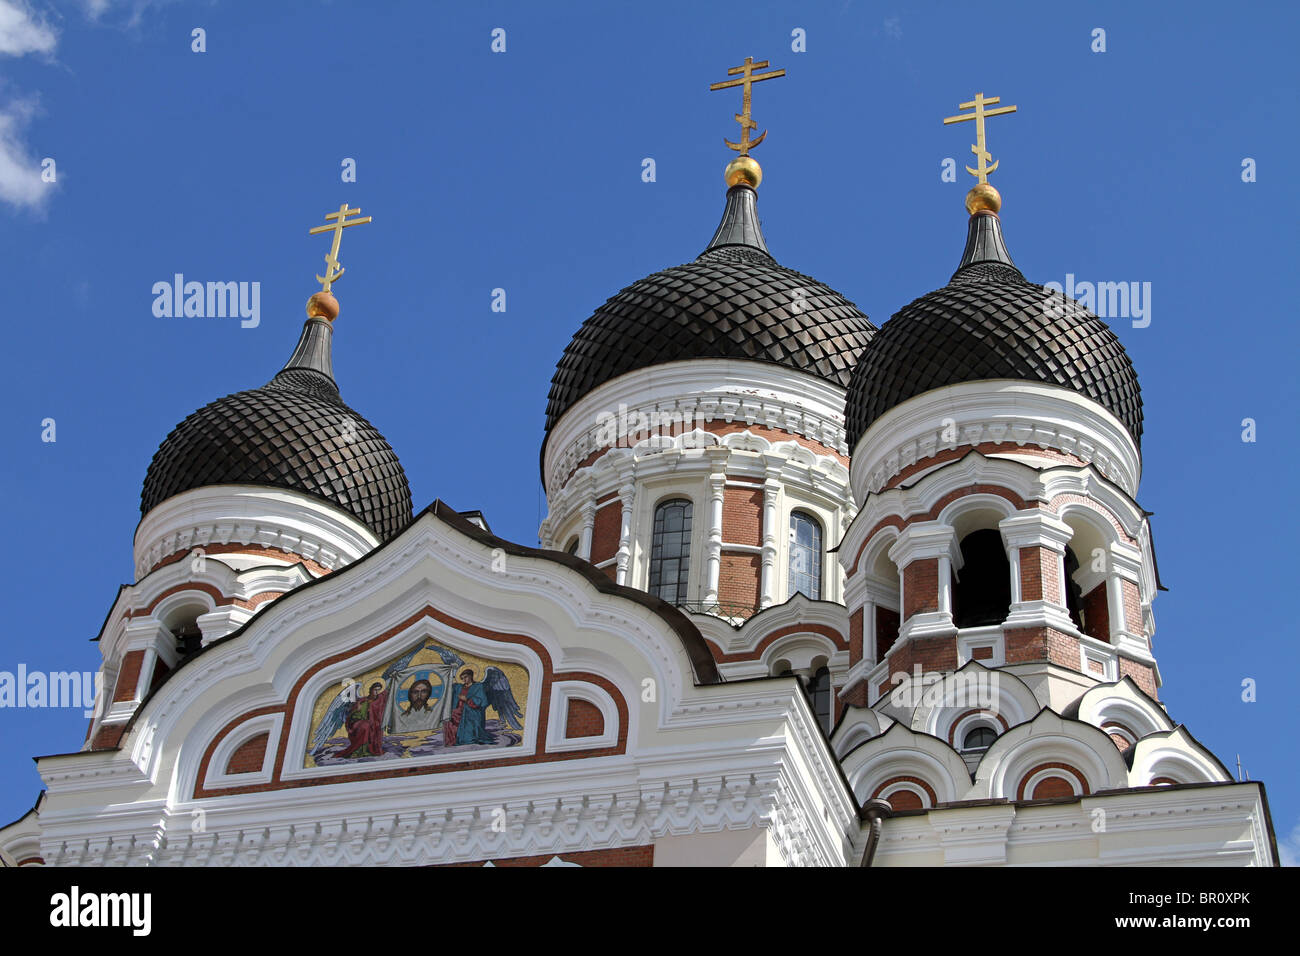 Domes of the Alexander Nevsky Cathedral in Tallinn, Estonia Stock Photo